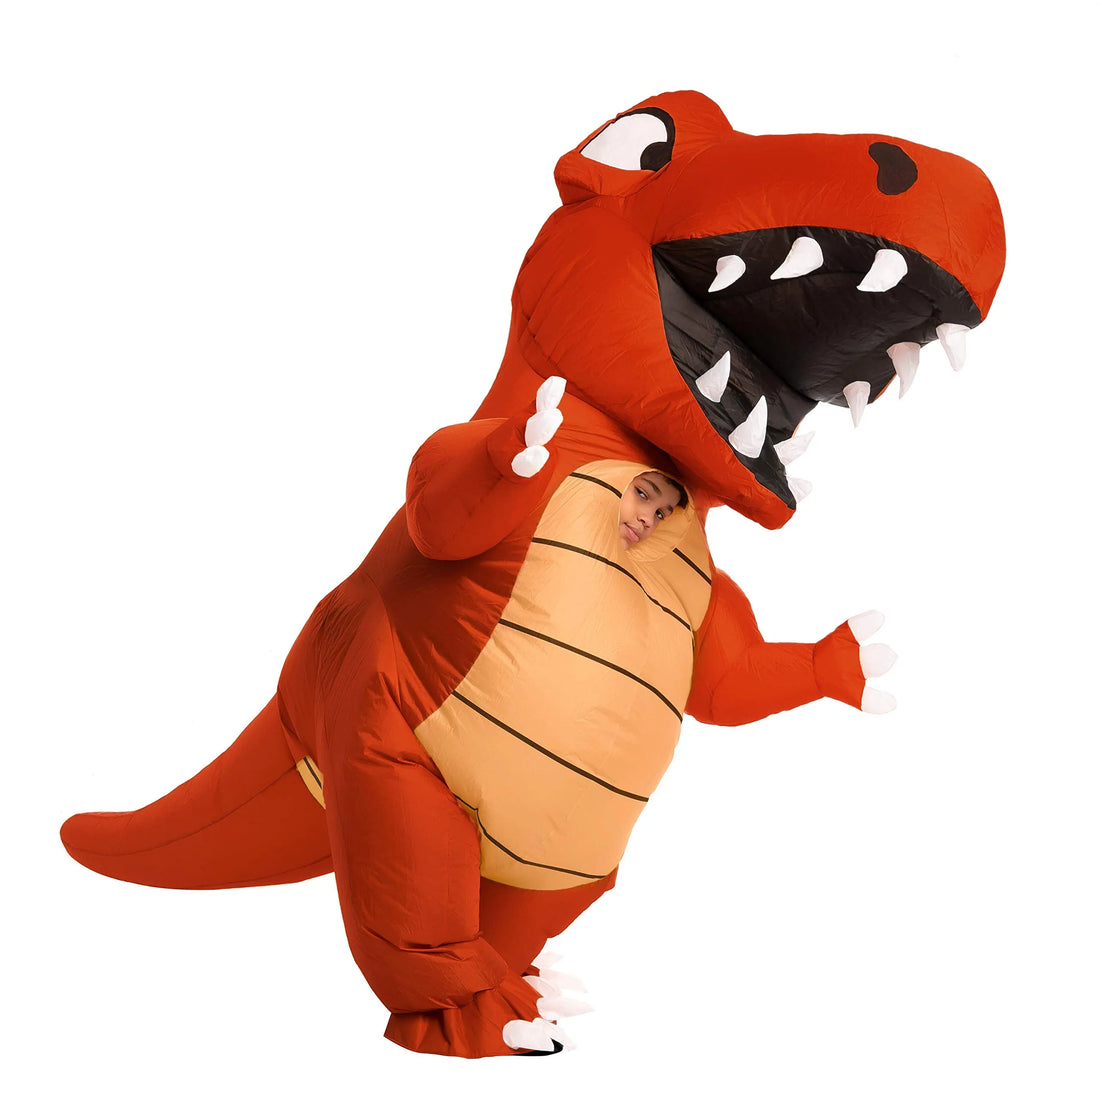 How to Organize an Inflatable T-Rex Costume: A Step-by-Step Guide